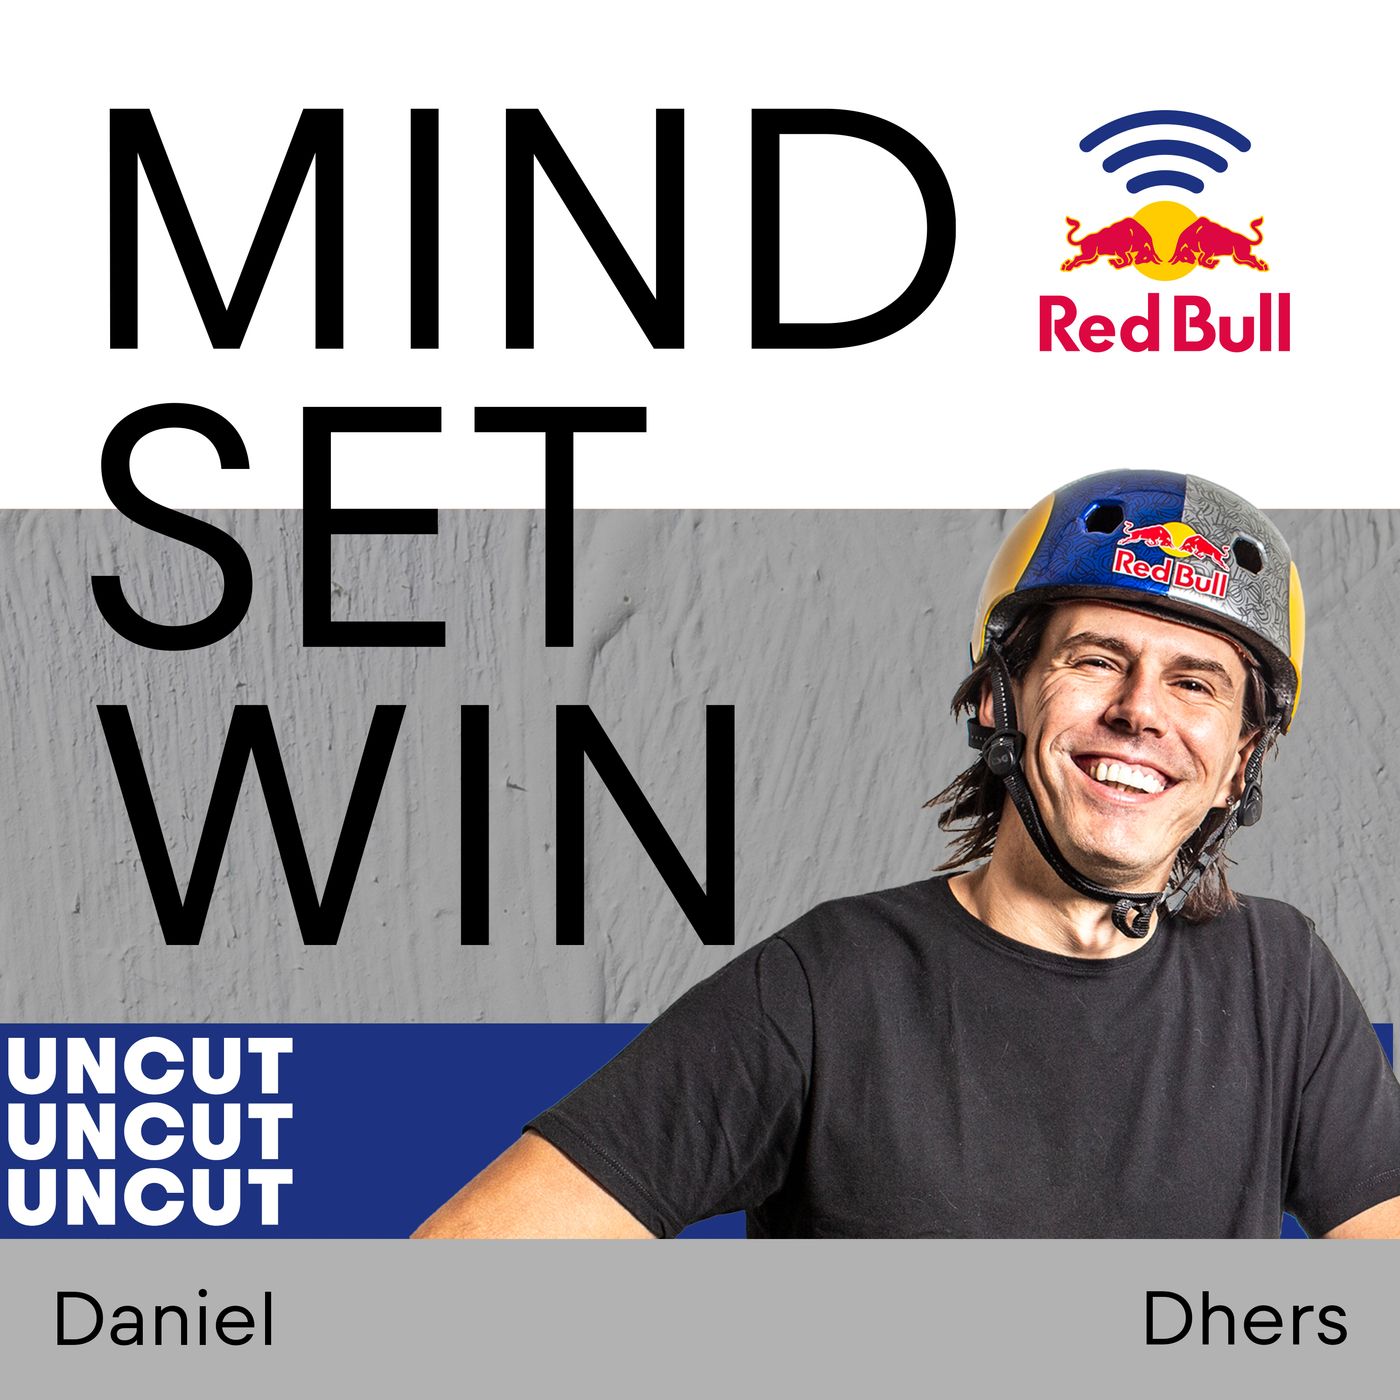 UNCUT: Full-length interview with legend of the BMX scene Daniel Dhers